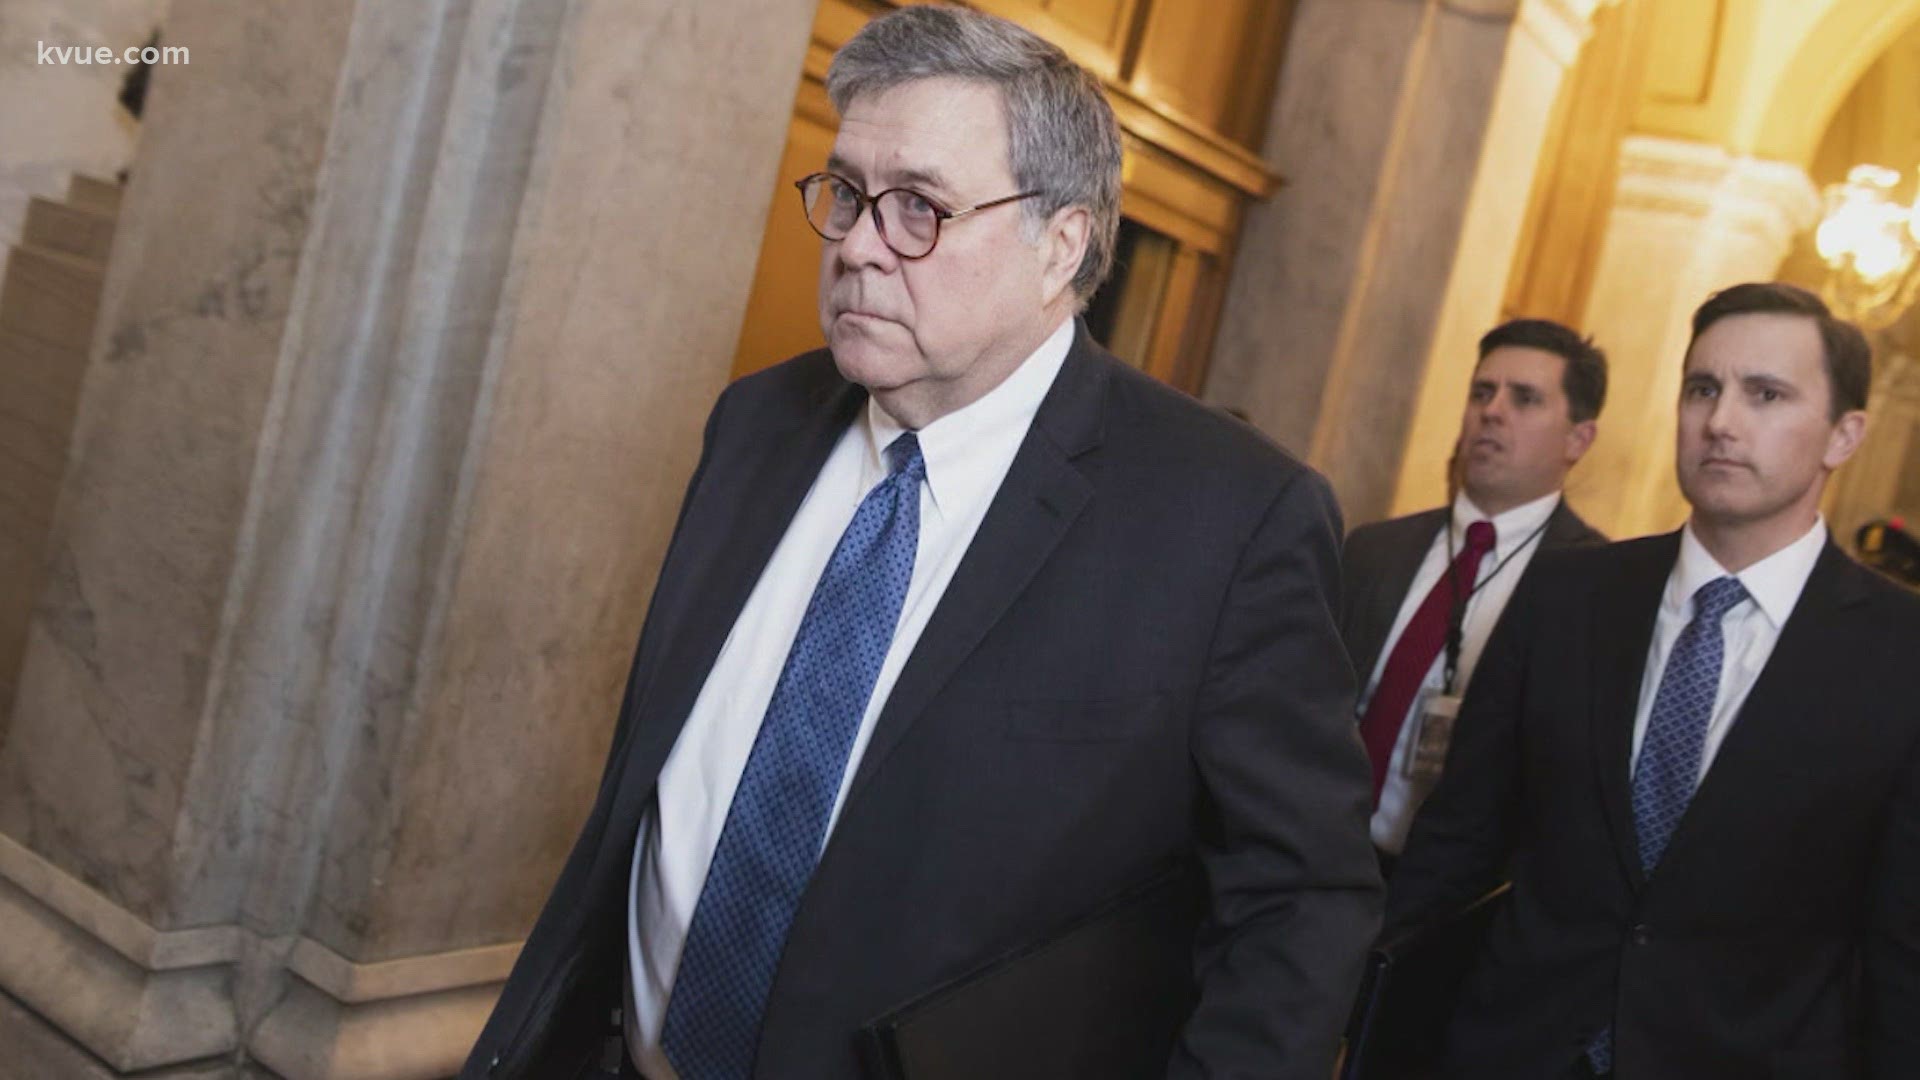 U.S. Attorney General William Barr is resigning. President Donald Trump made the announcement in a tweet Monday.